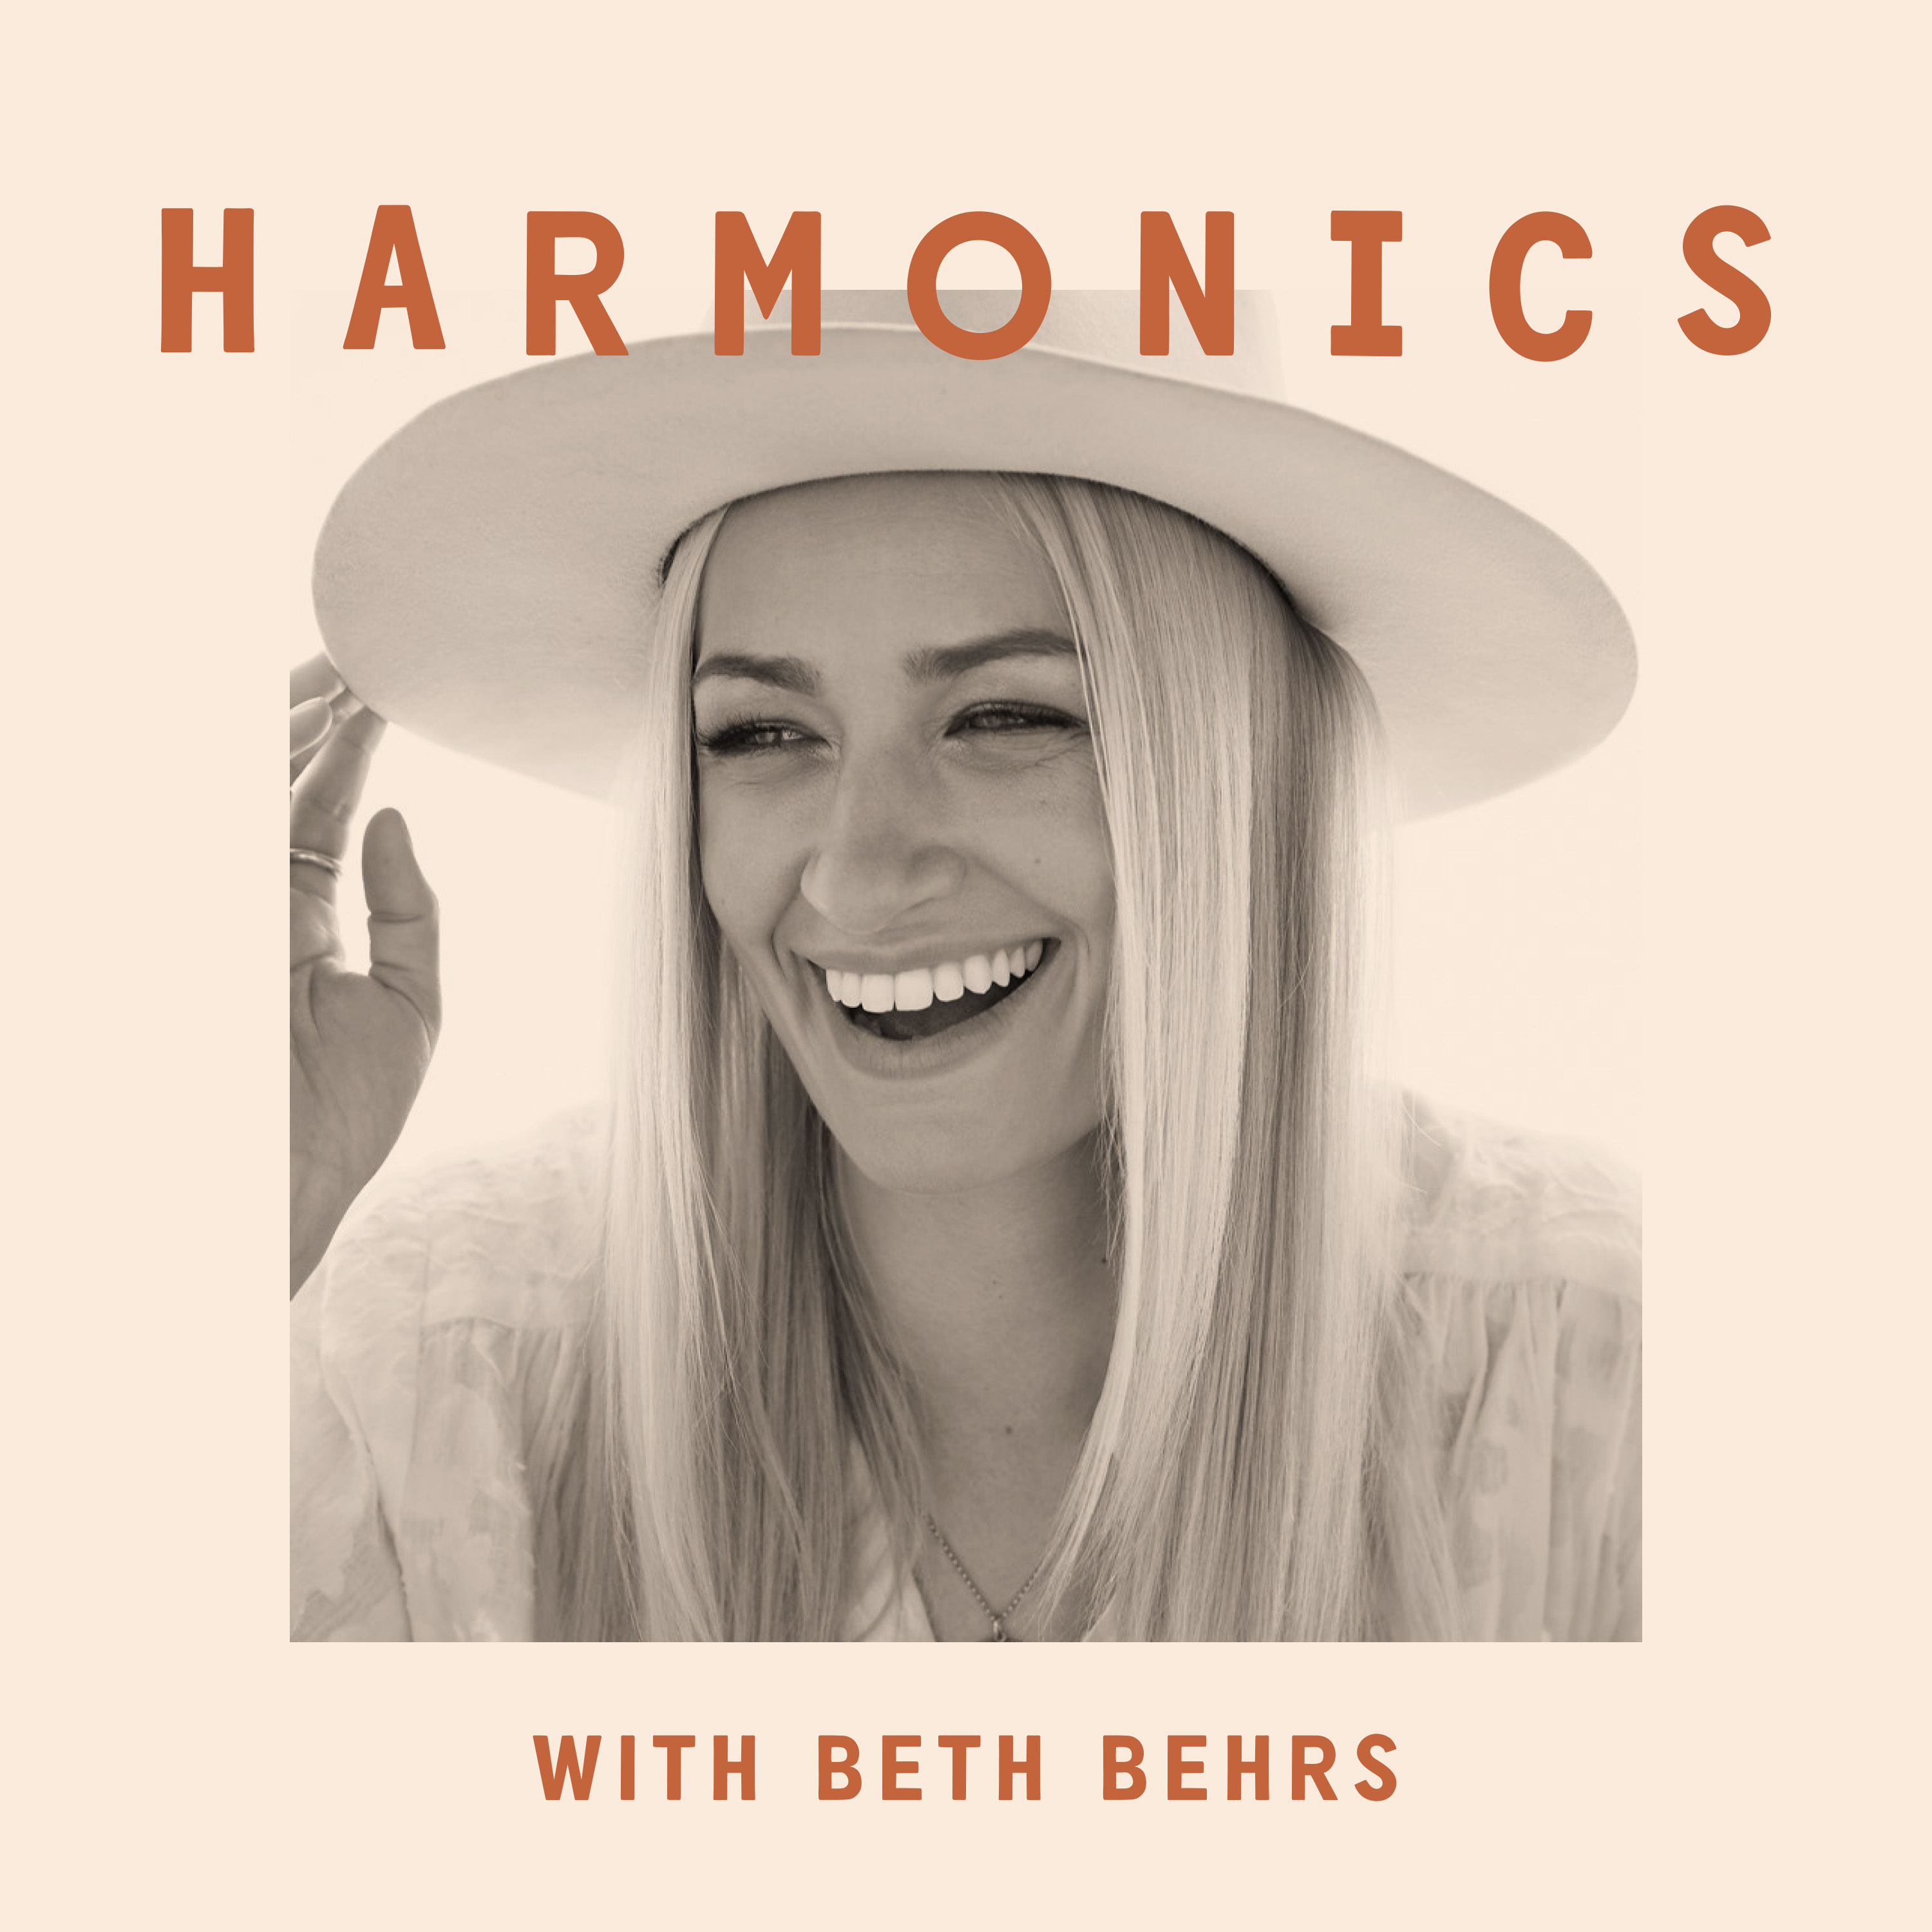 A little love song from Beth